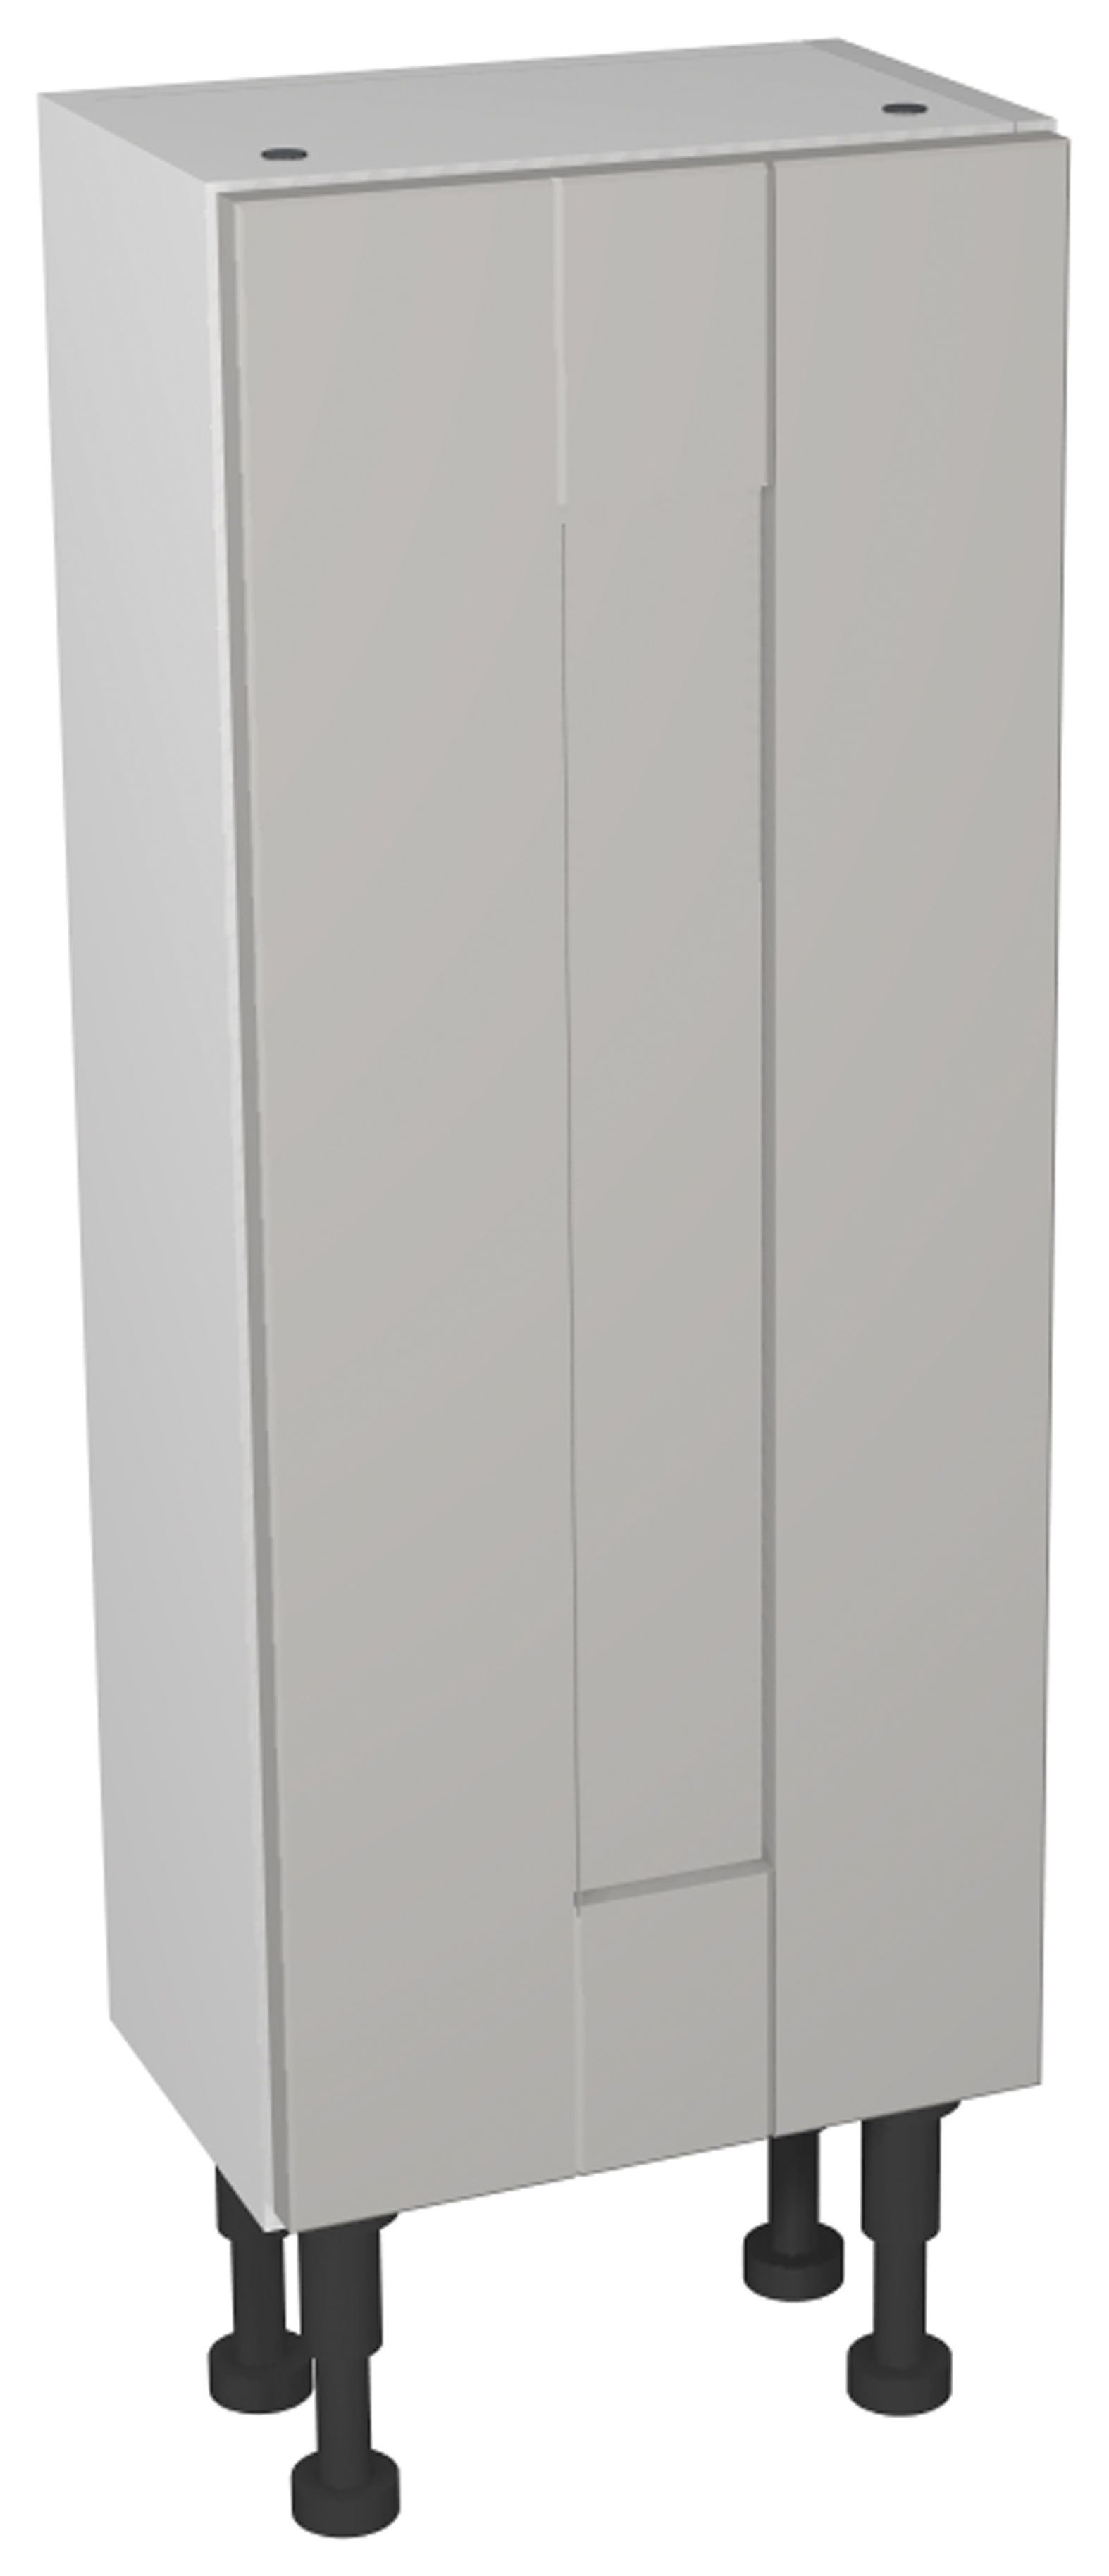 Image of Wickes Vermont Grey Compact Storage Unit - 300 x 735mm